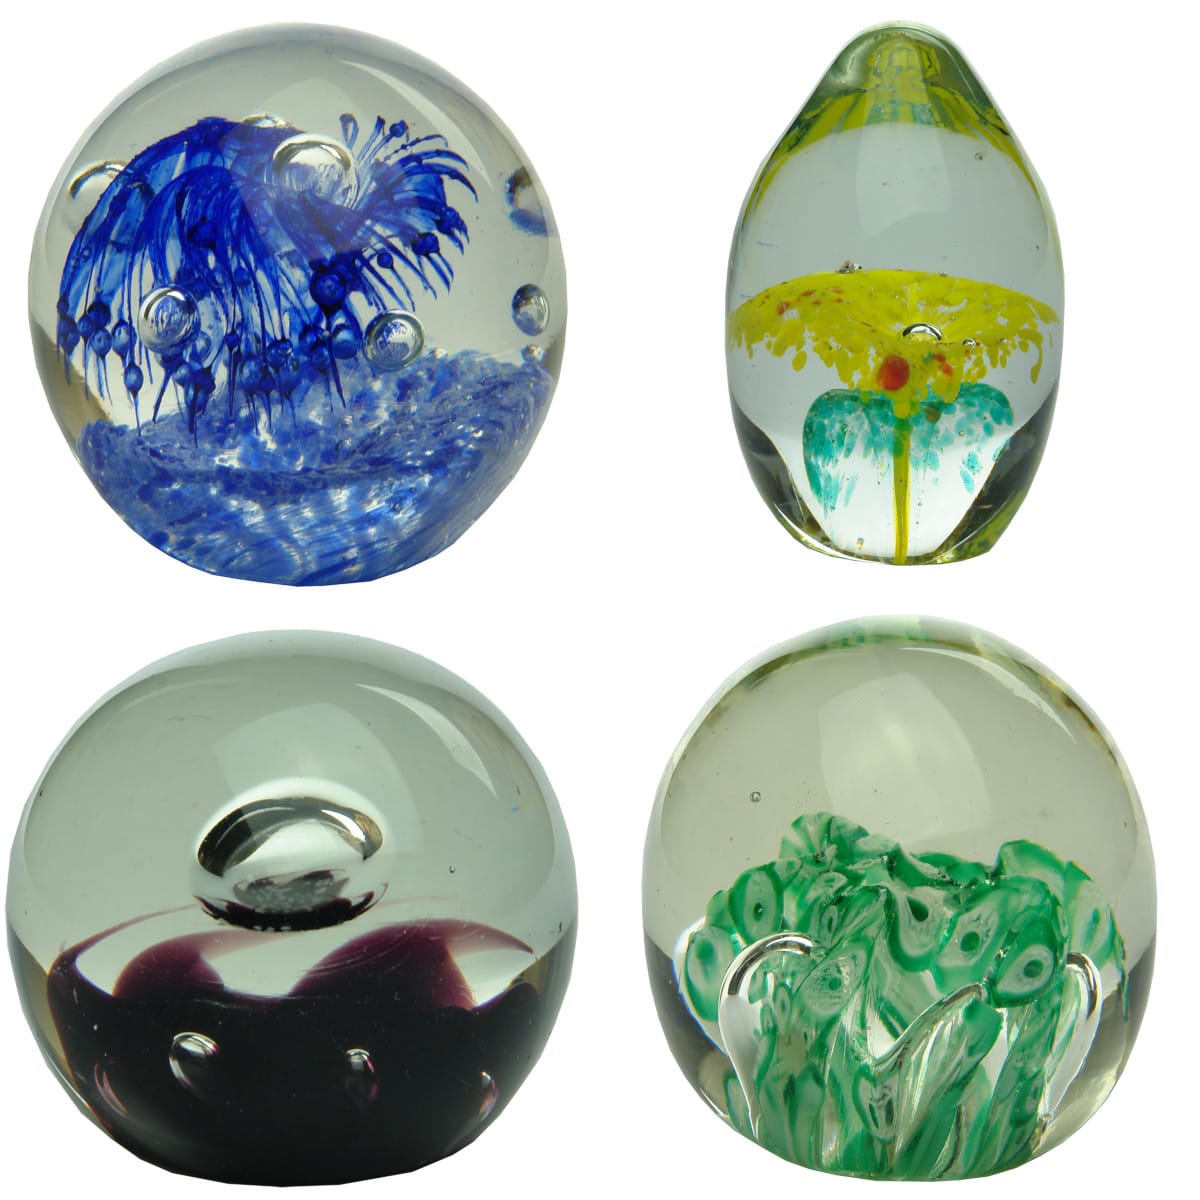 4 Glass Paperweights. Blue & White "Starburst"; Pointy egg shape Yellow & Green; Queen Elizabeth II Jubilee; Oval Green & White Candy Cane.